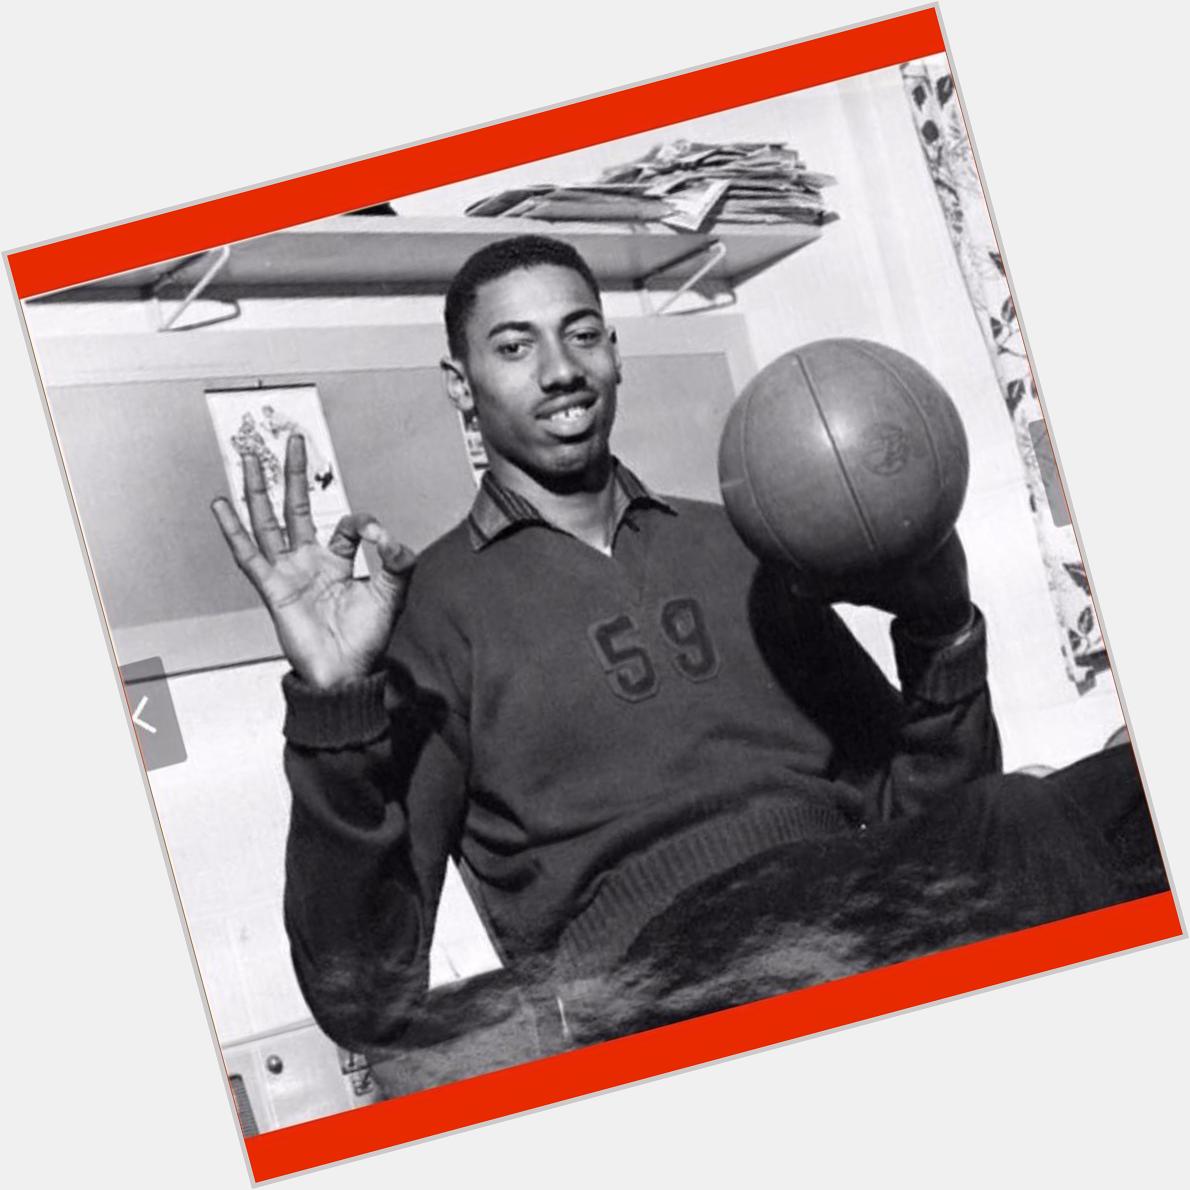 Happy birthday to a man who has some to the best numbers on the court as well as off the court   , Wilt Chamberlain 